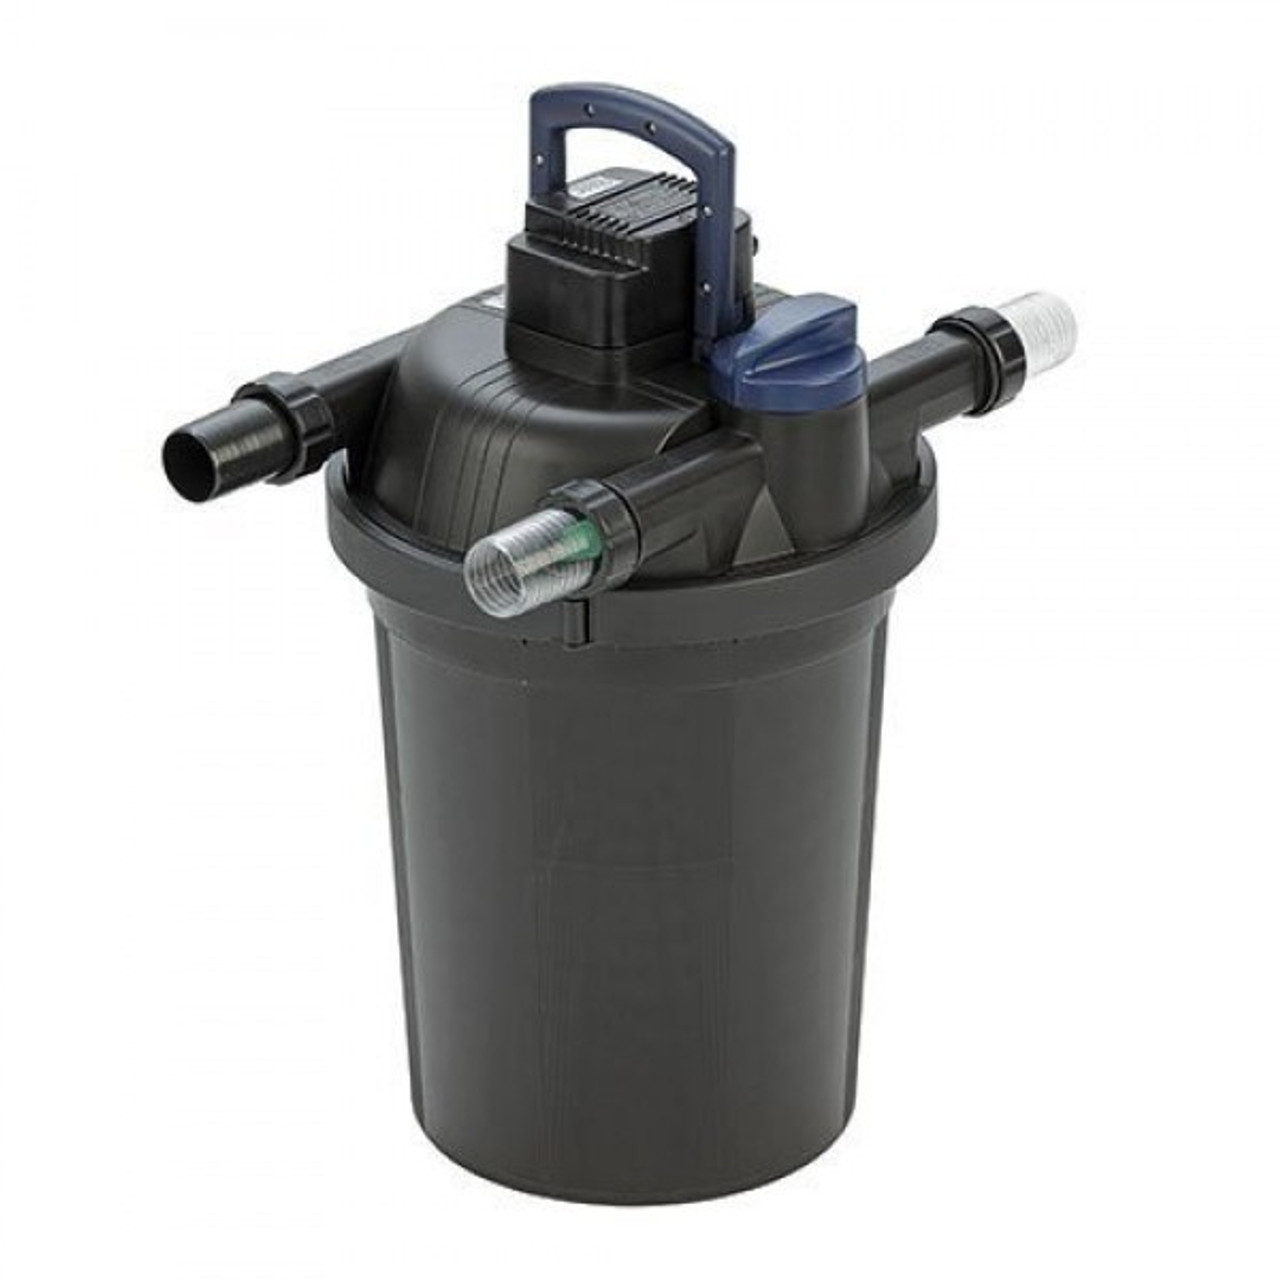 OASE FiltoClear 4000 Pressure Filter w/ UV Clarifier (FREE SHIPPING)